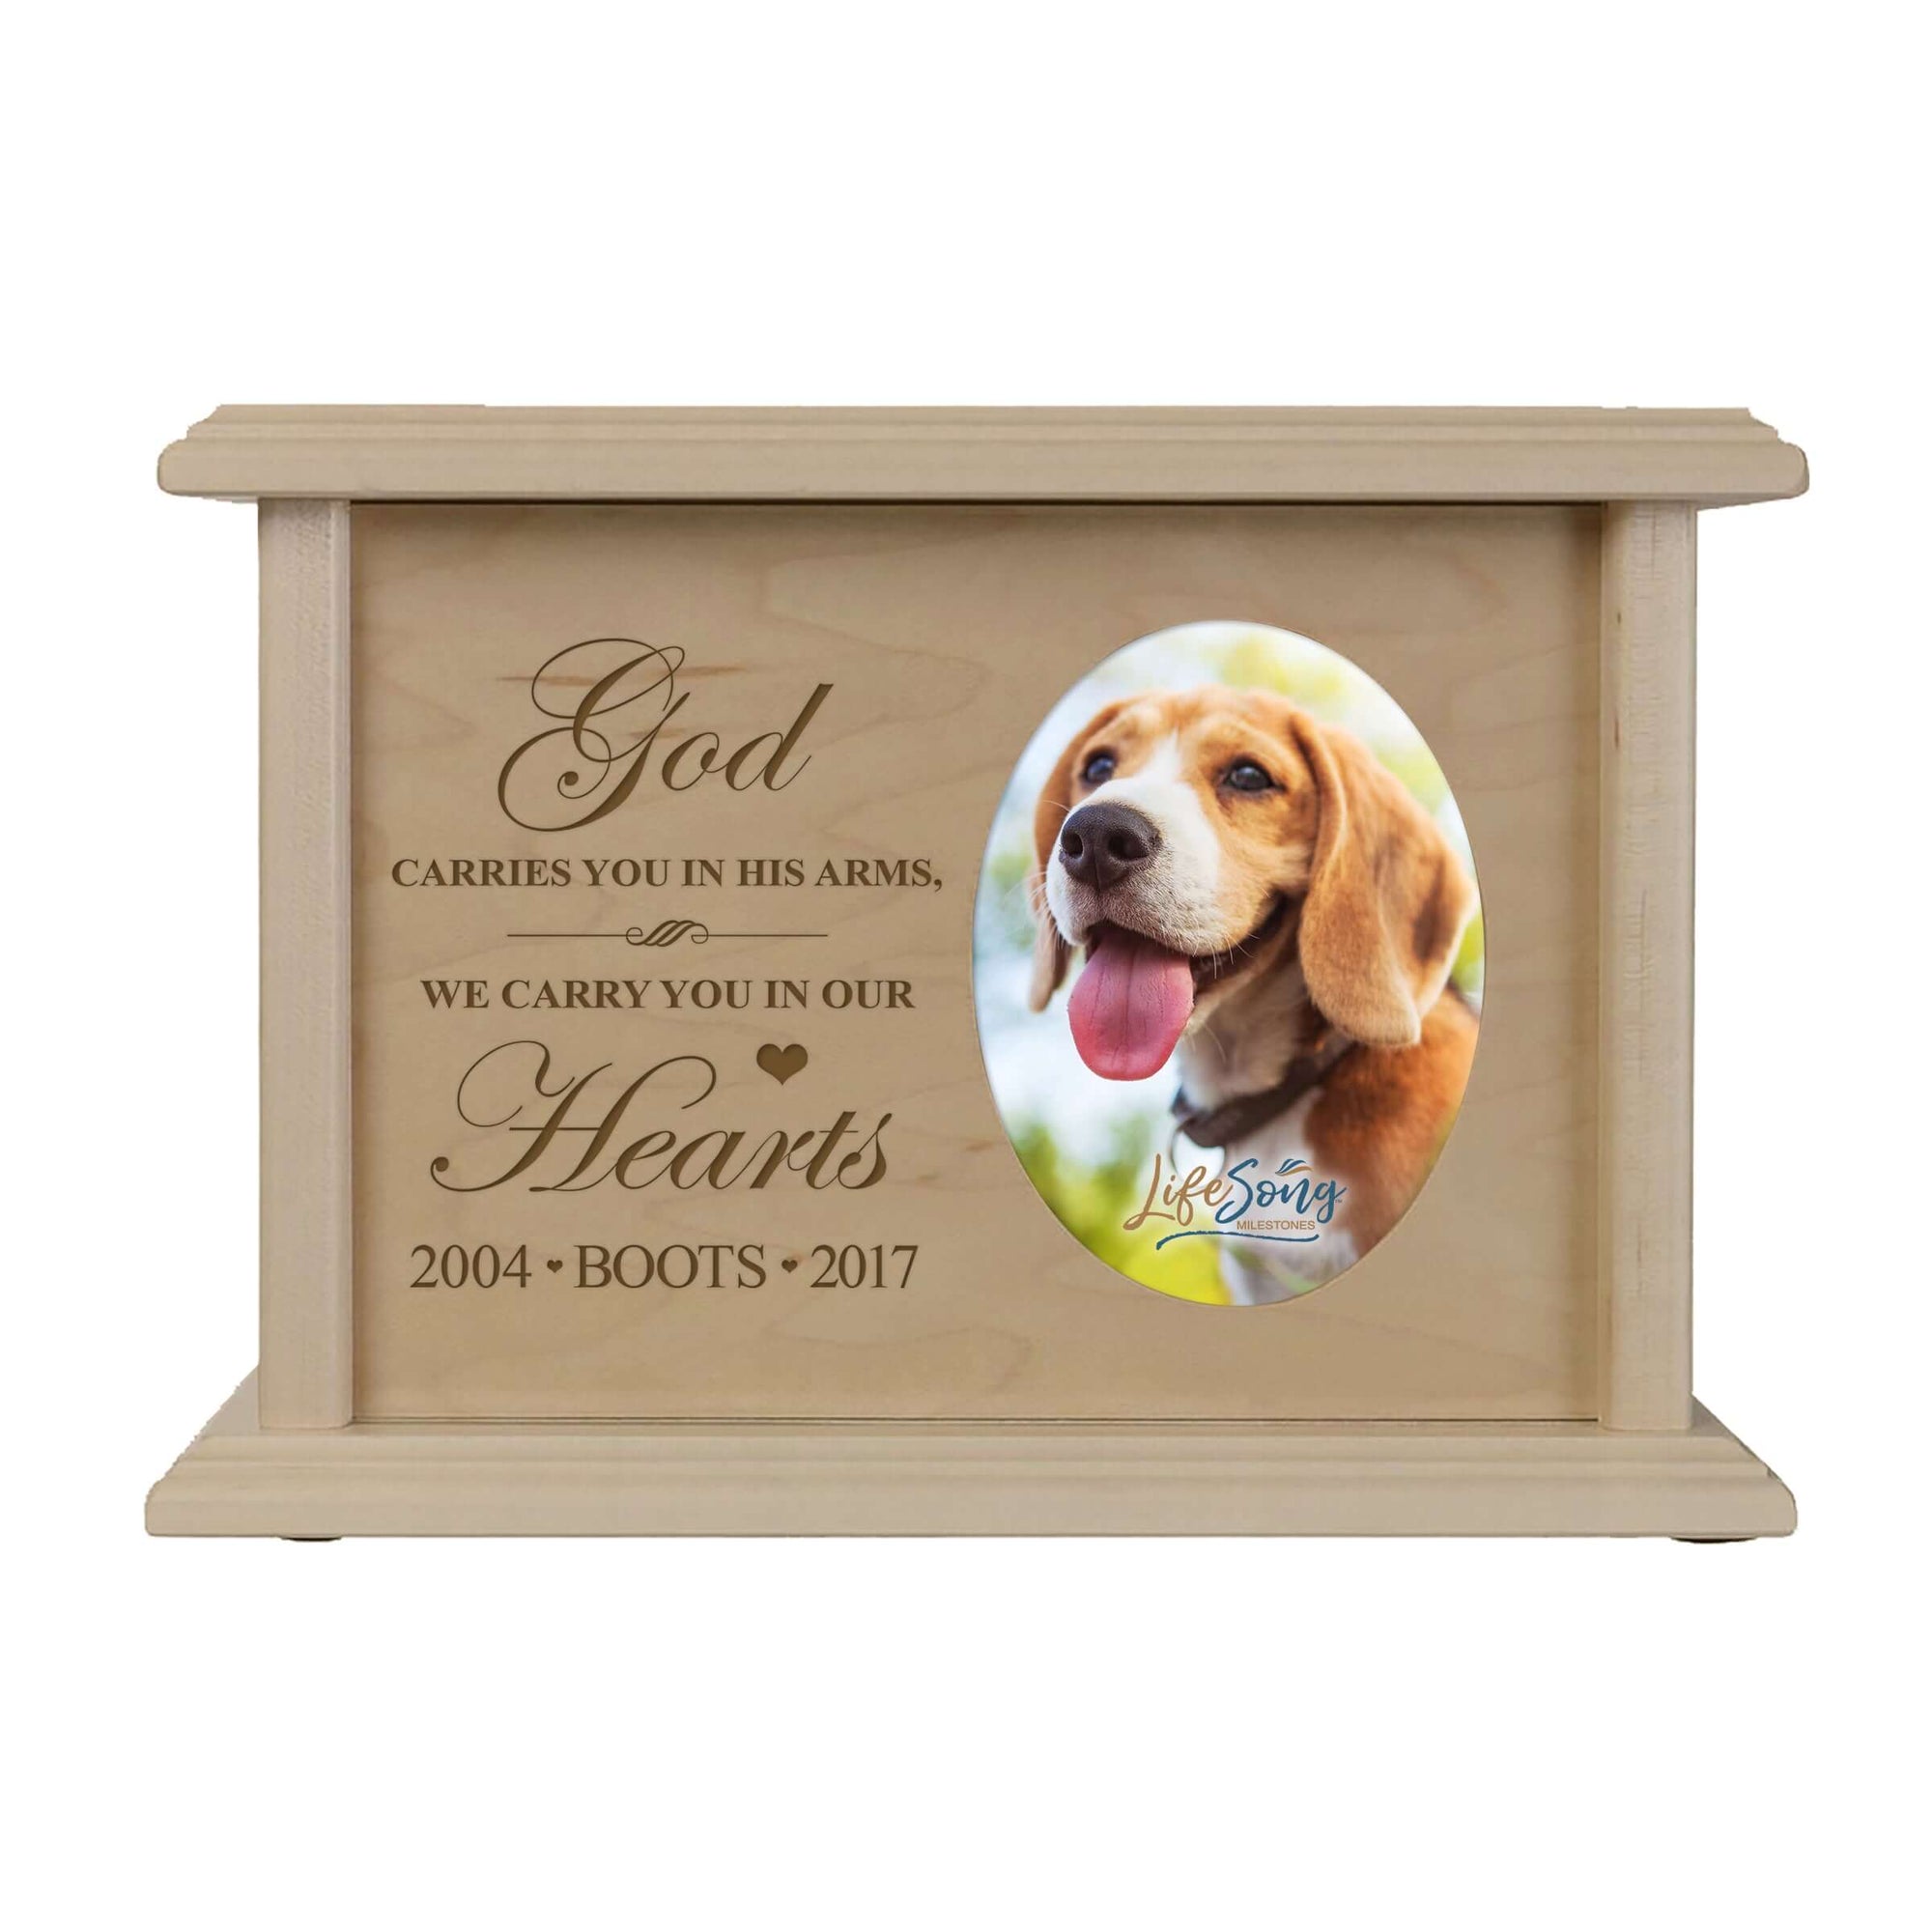 Pet Memorial Picture Cremation Urn Box for Dog or Cat - God Carries You In His Arms